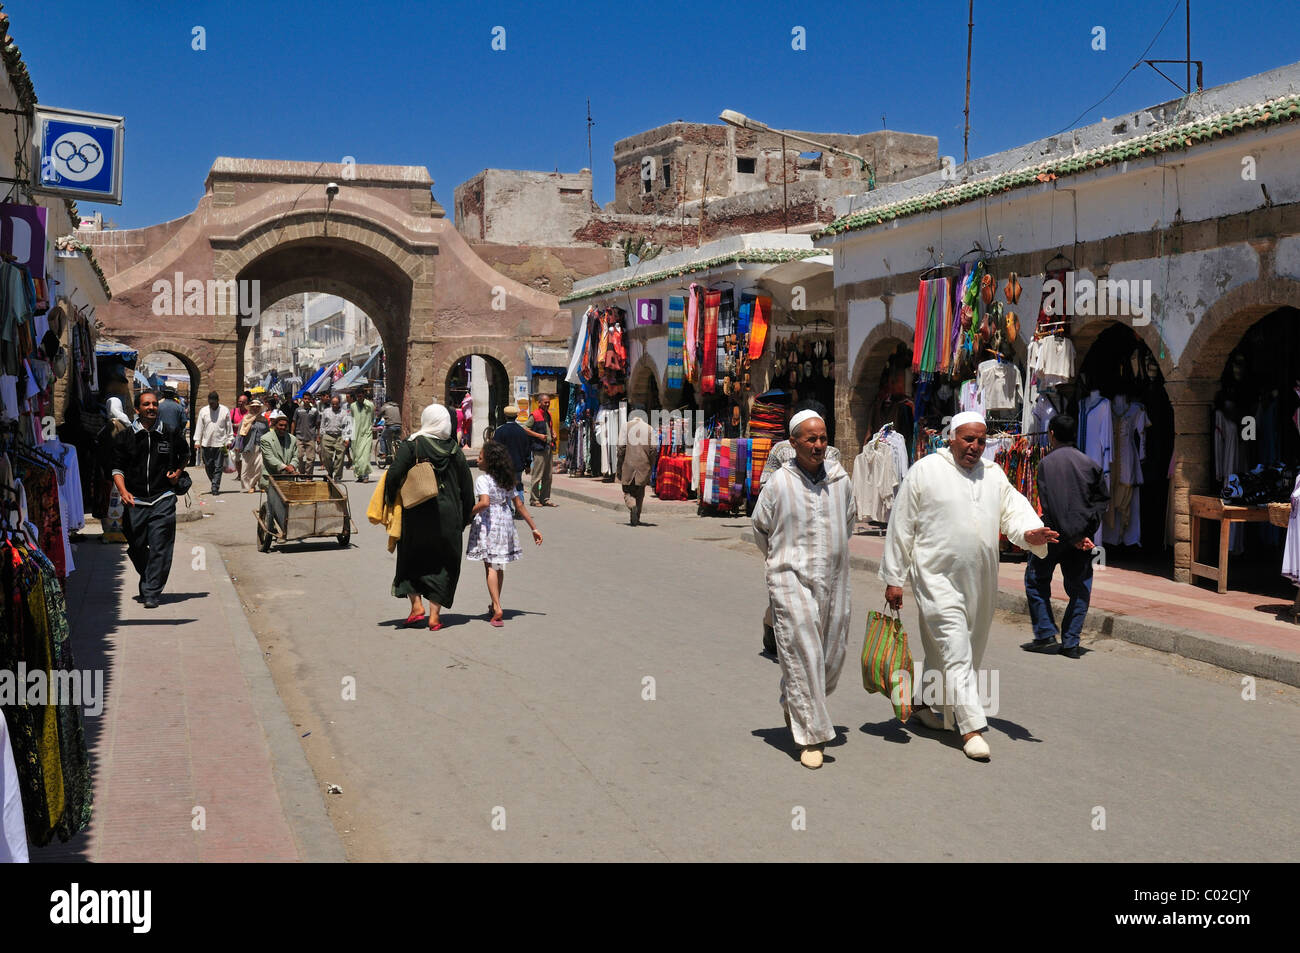 Souk in the historic town of Essaouira, Unesco World Heritage Site, Morocco, North Africa Stock Photo